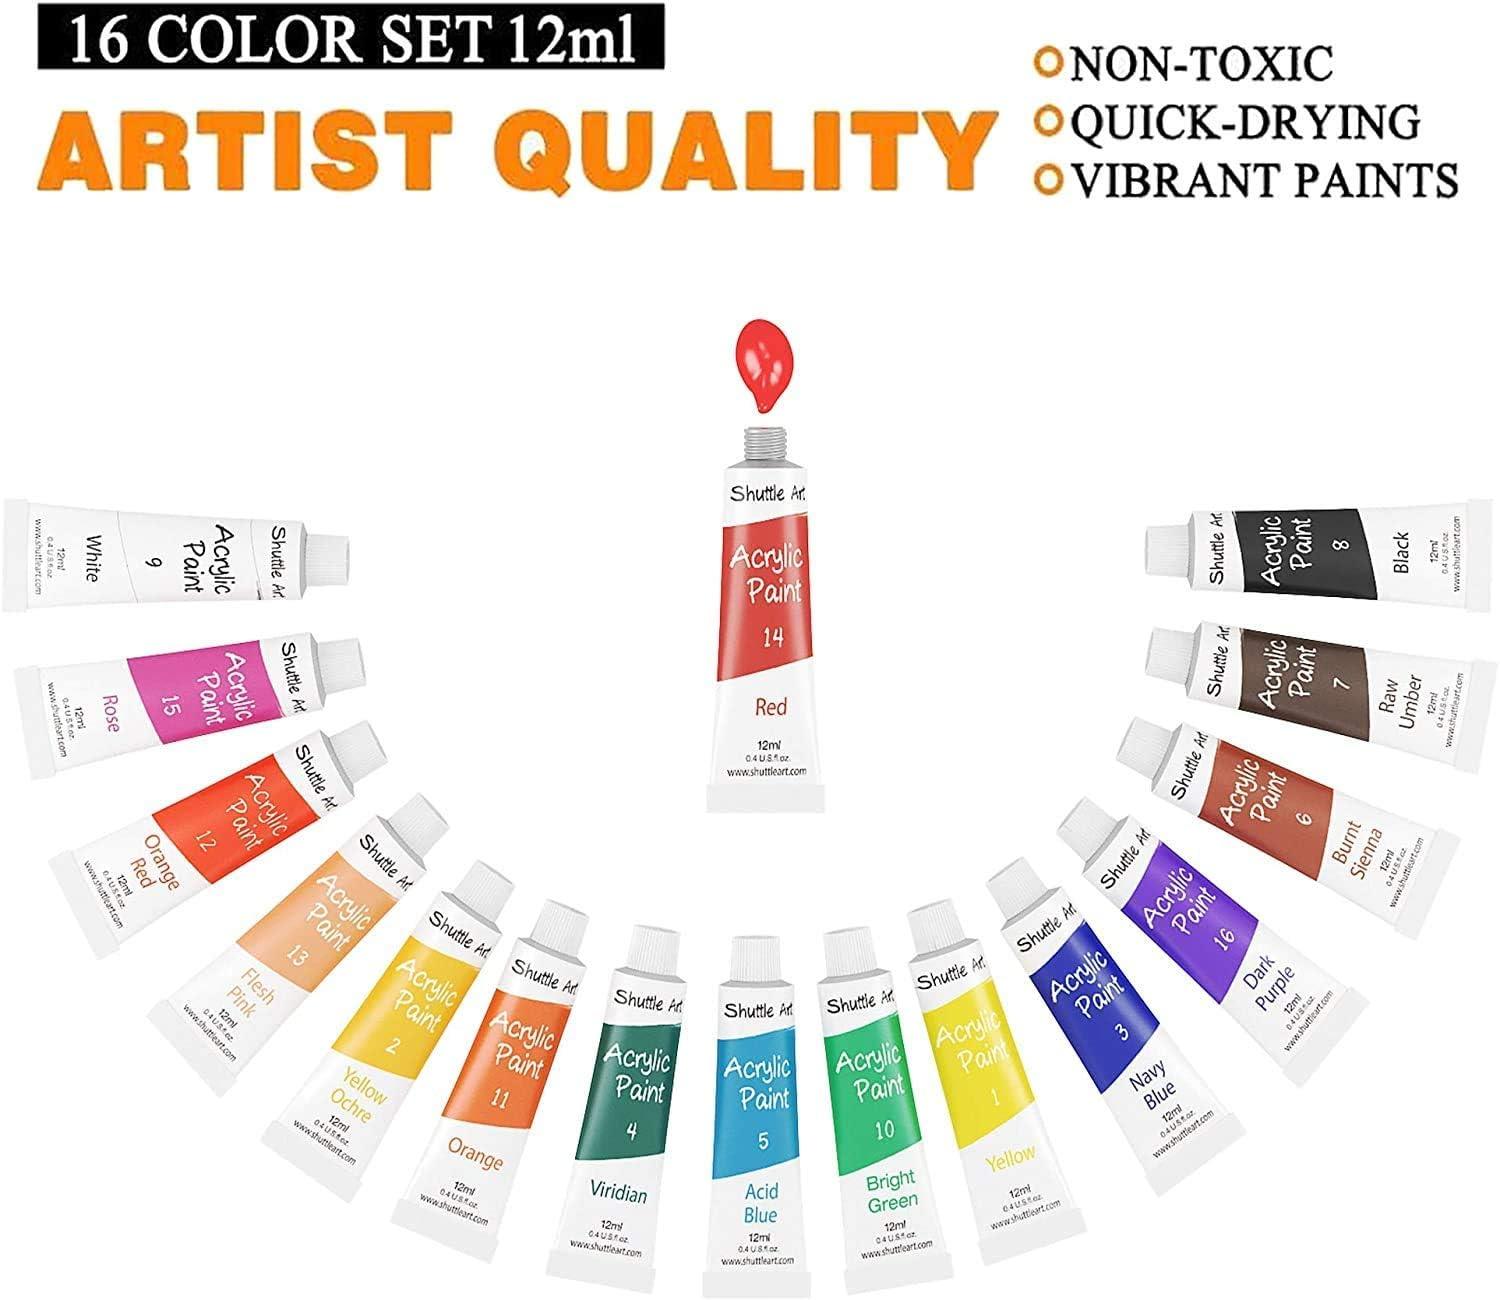  Shuttle Art Acrylic Paint Set, 30 x12ml Tubes Artist Quality  Non Toxic Rich Pigments Colors Great for Kids Adults Professional Painting  on Rocks Canvas Wood Clay Fabric Ceramic Crafts : Arts